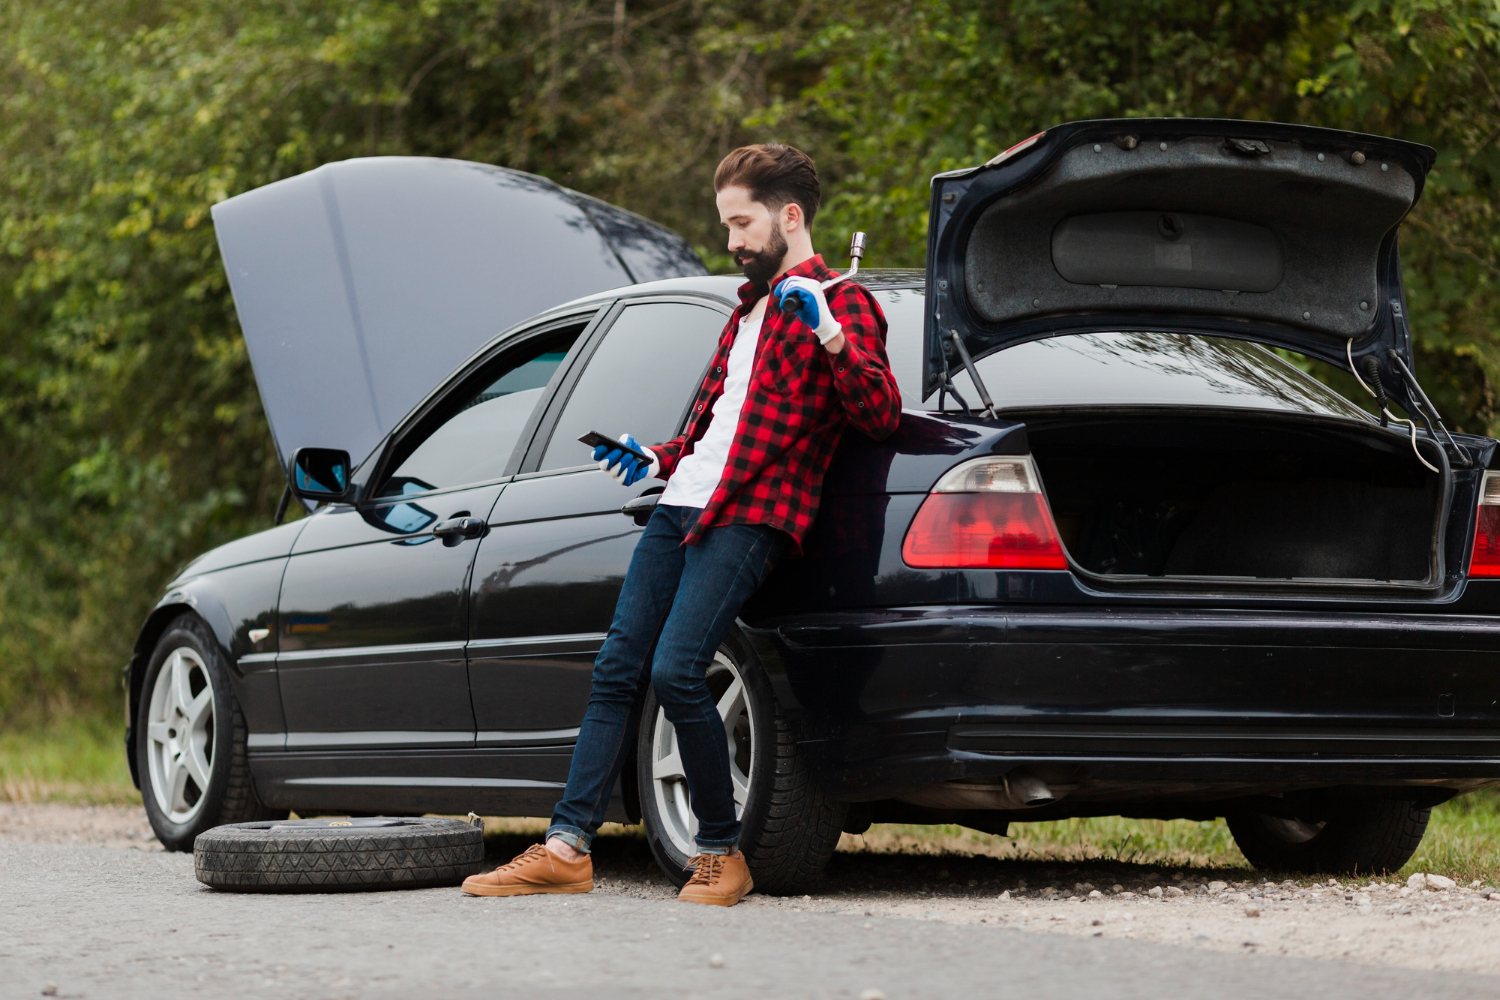 Turn Your Junk Car Into Cash: The Hassle-Free Process of Junk Car Removal Services